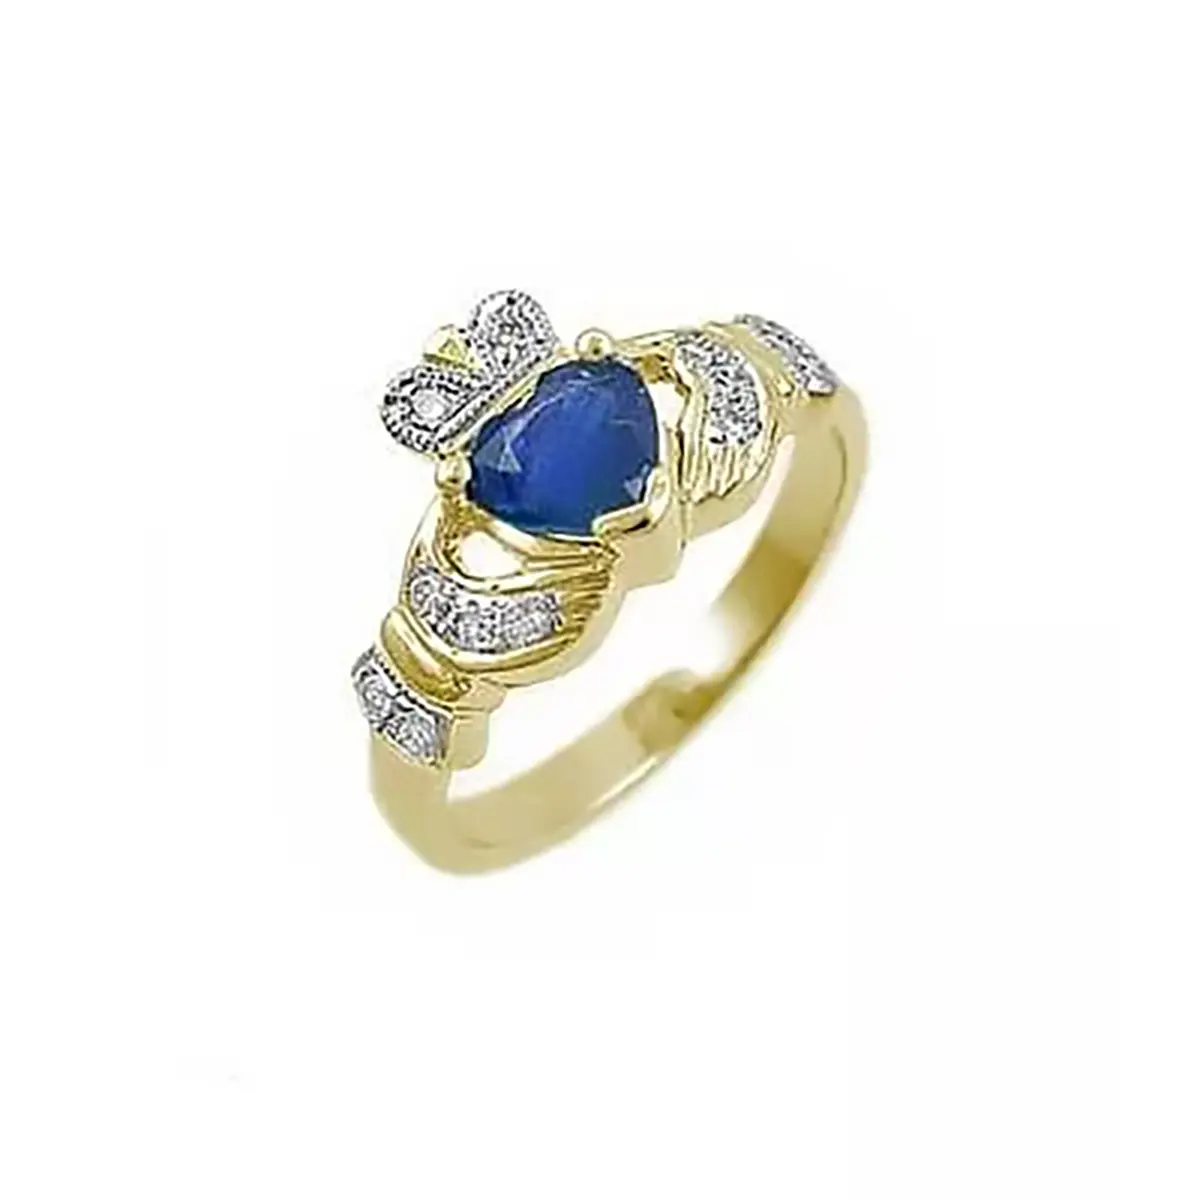 Claddagh Ring With Heartshape Sapphire And Diamond Set In 14k Gold